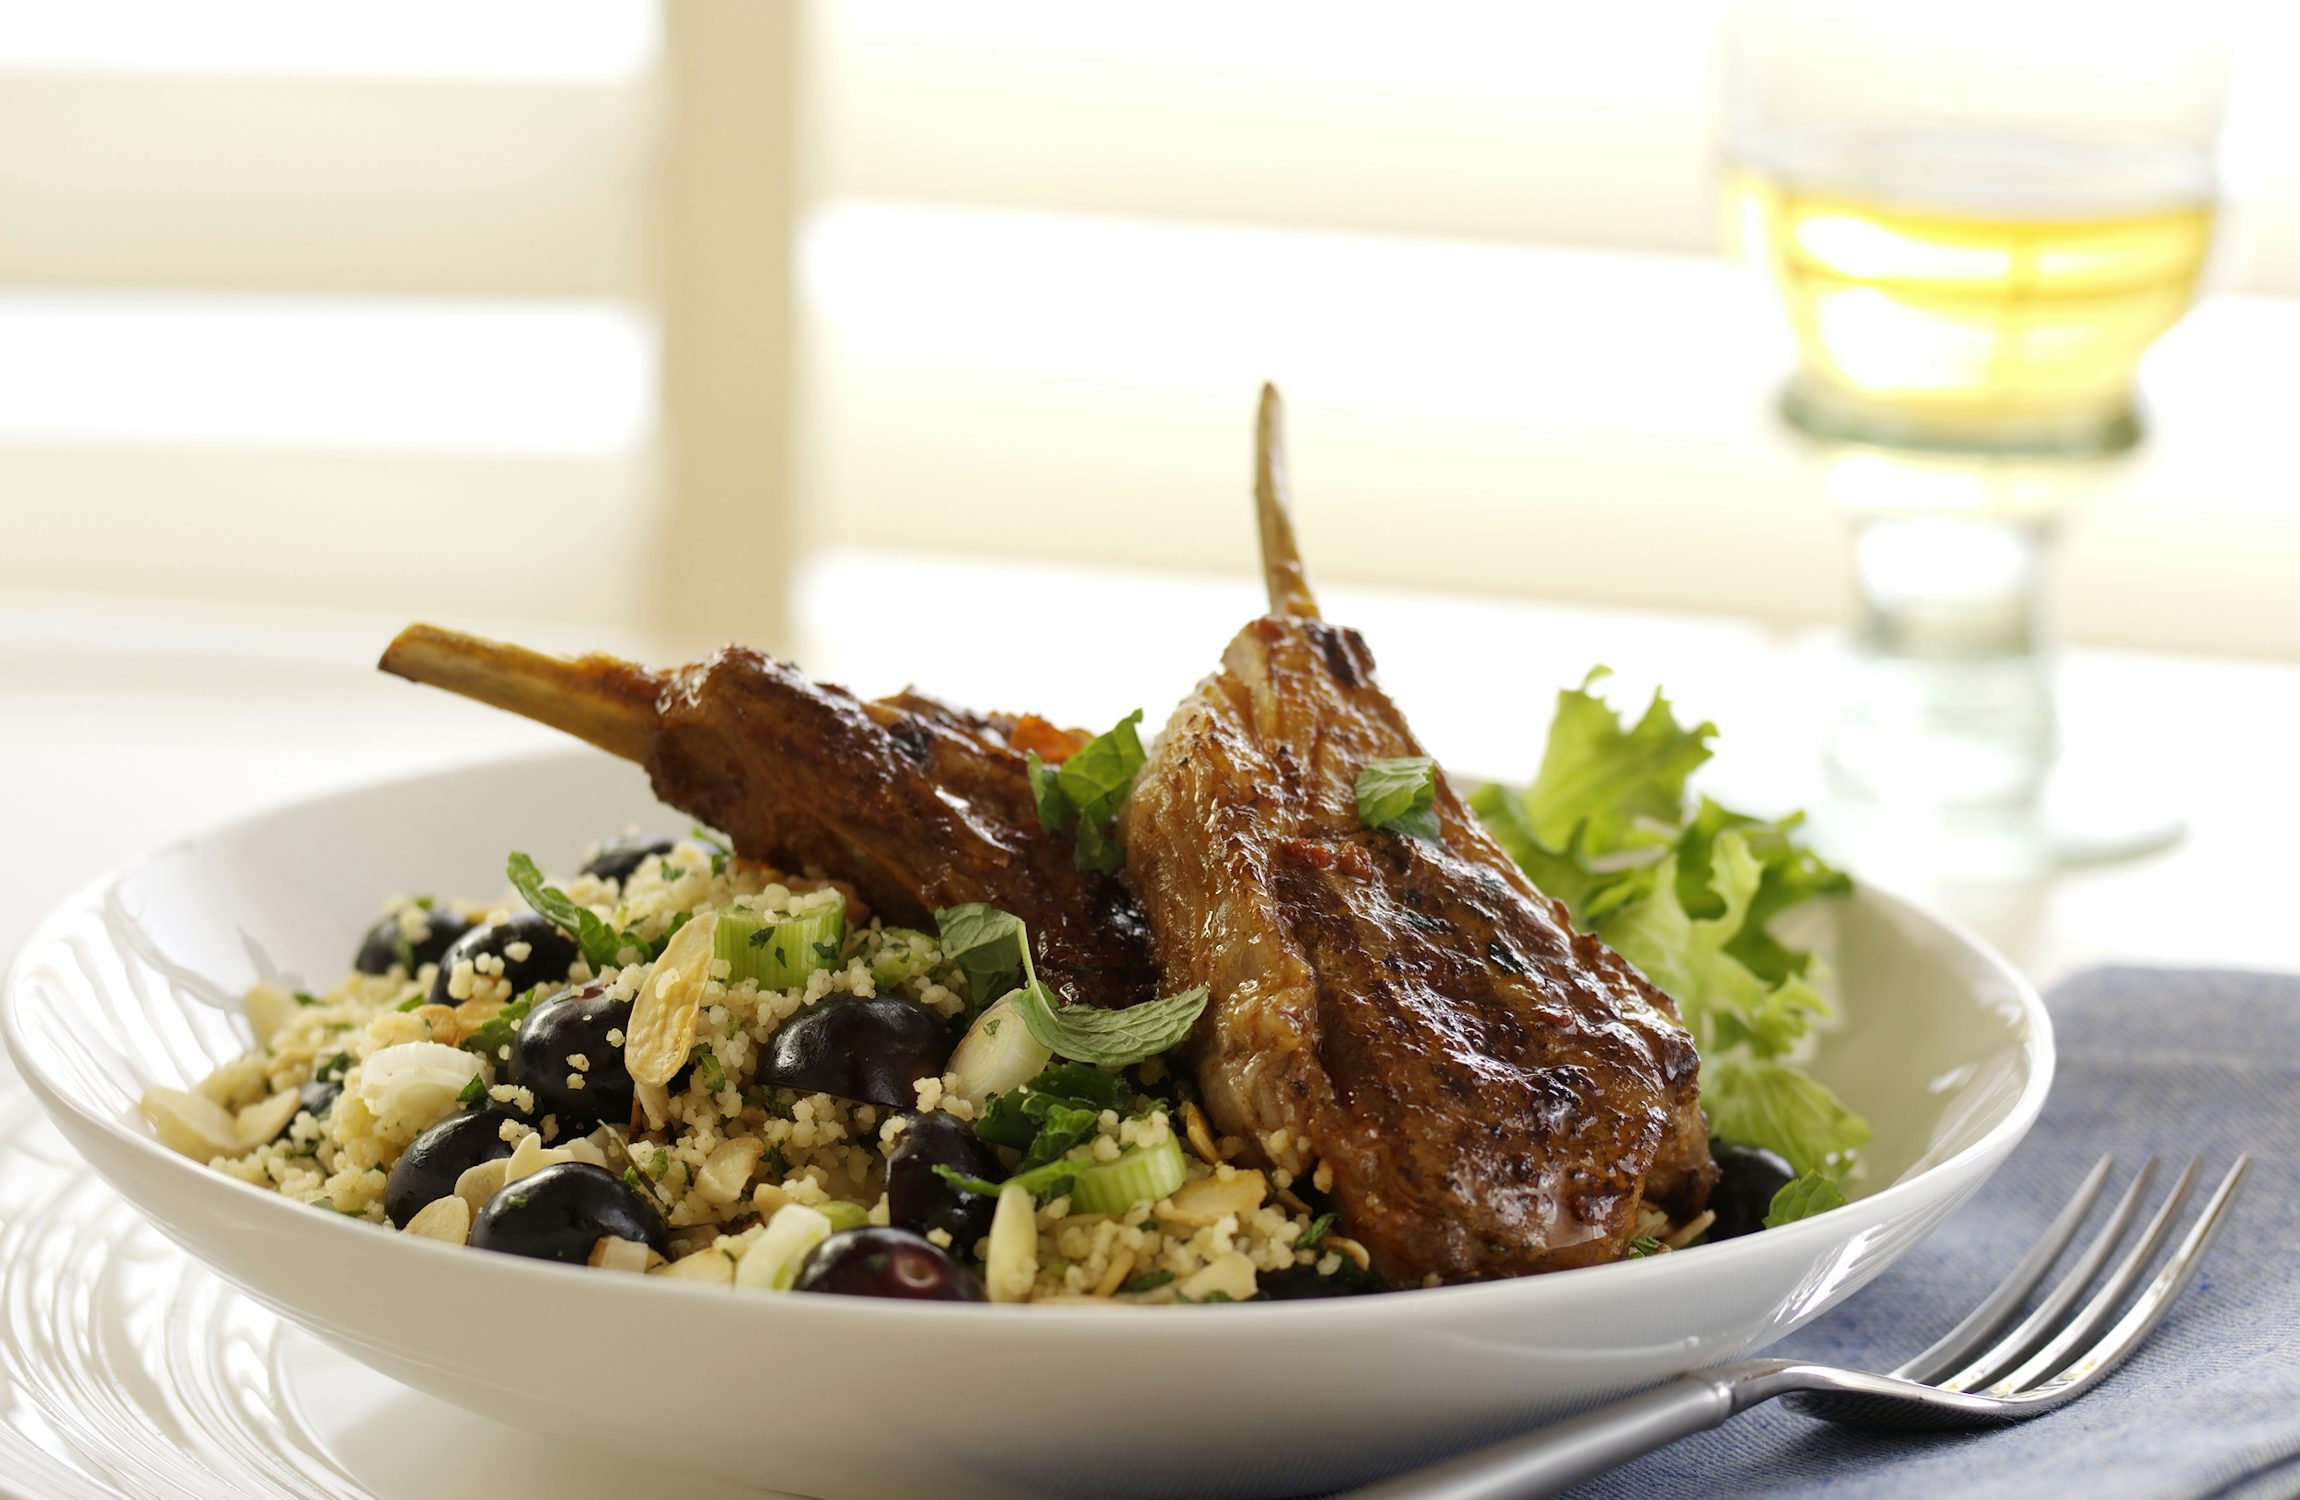 Griddled Harissa Marinated Lamb with Blueberry, Spring Onion & Toasted Almond Couscous